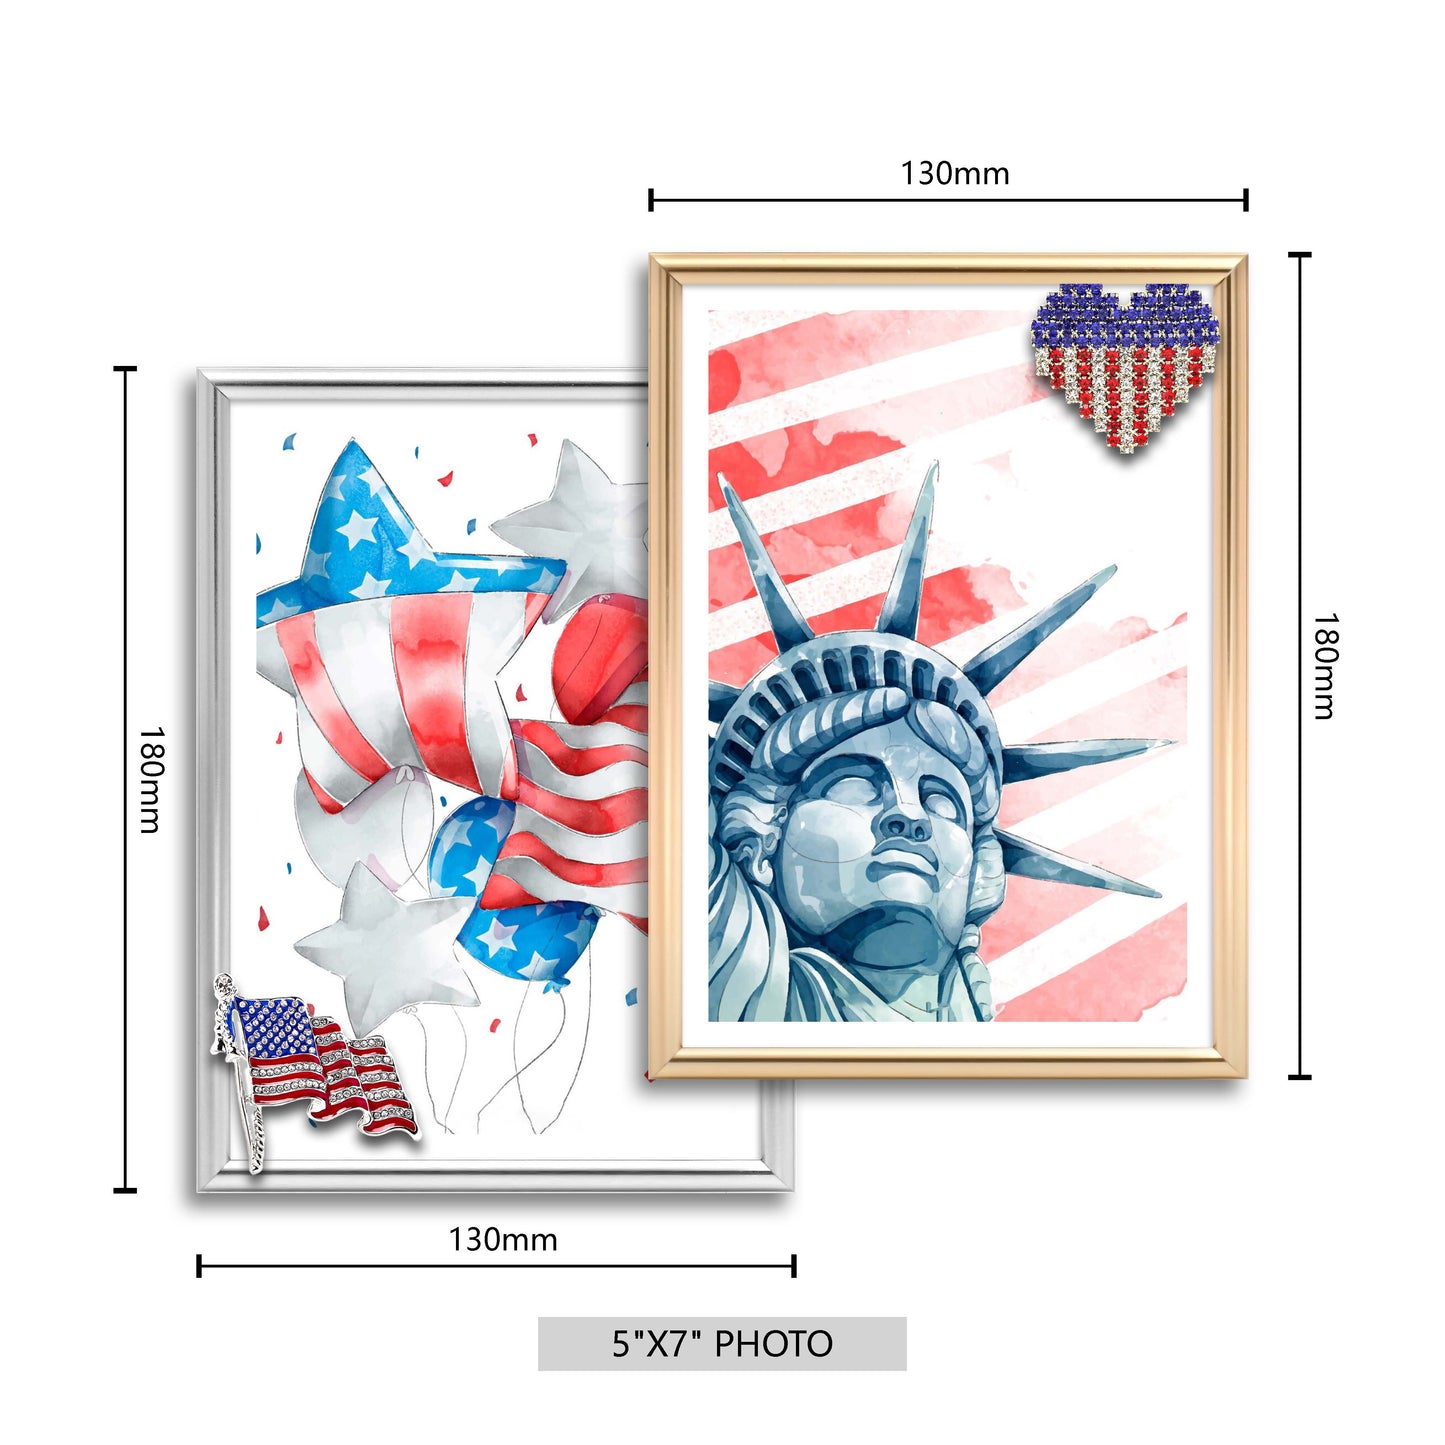 Dotride 5x7 Metal Picture Frames with Glass Panel 2 Pack, Tabletop Photo Frame with Detachable American Flag Ornaments, Perfect for Independence Day Commemoration, Gold and Silver